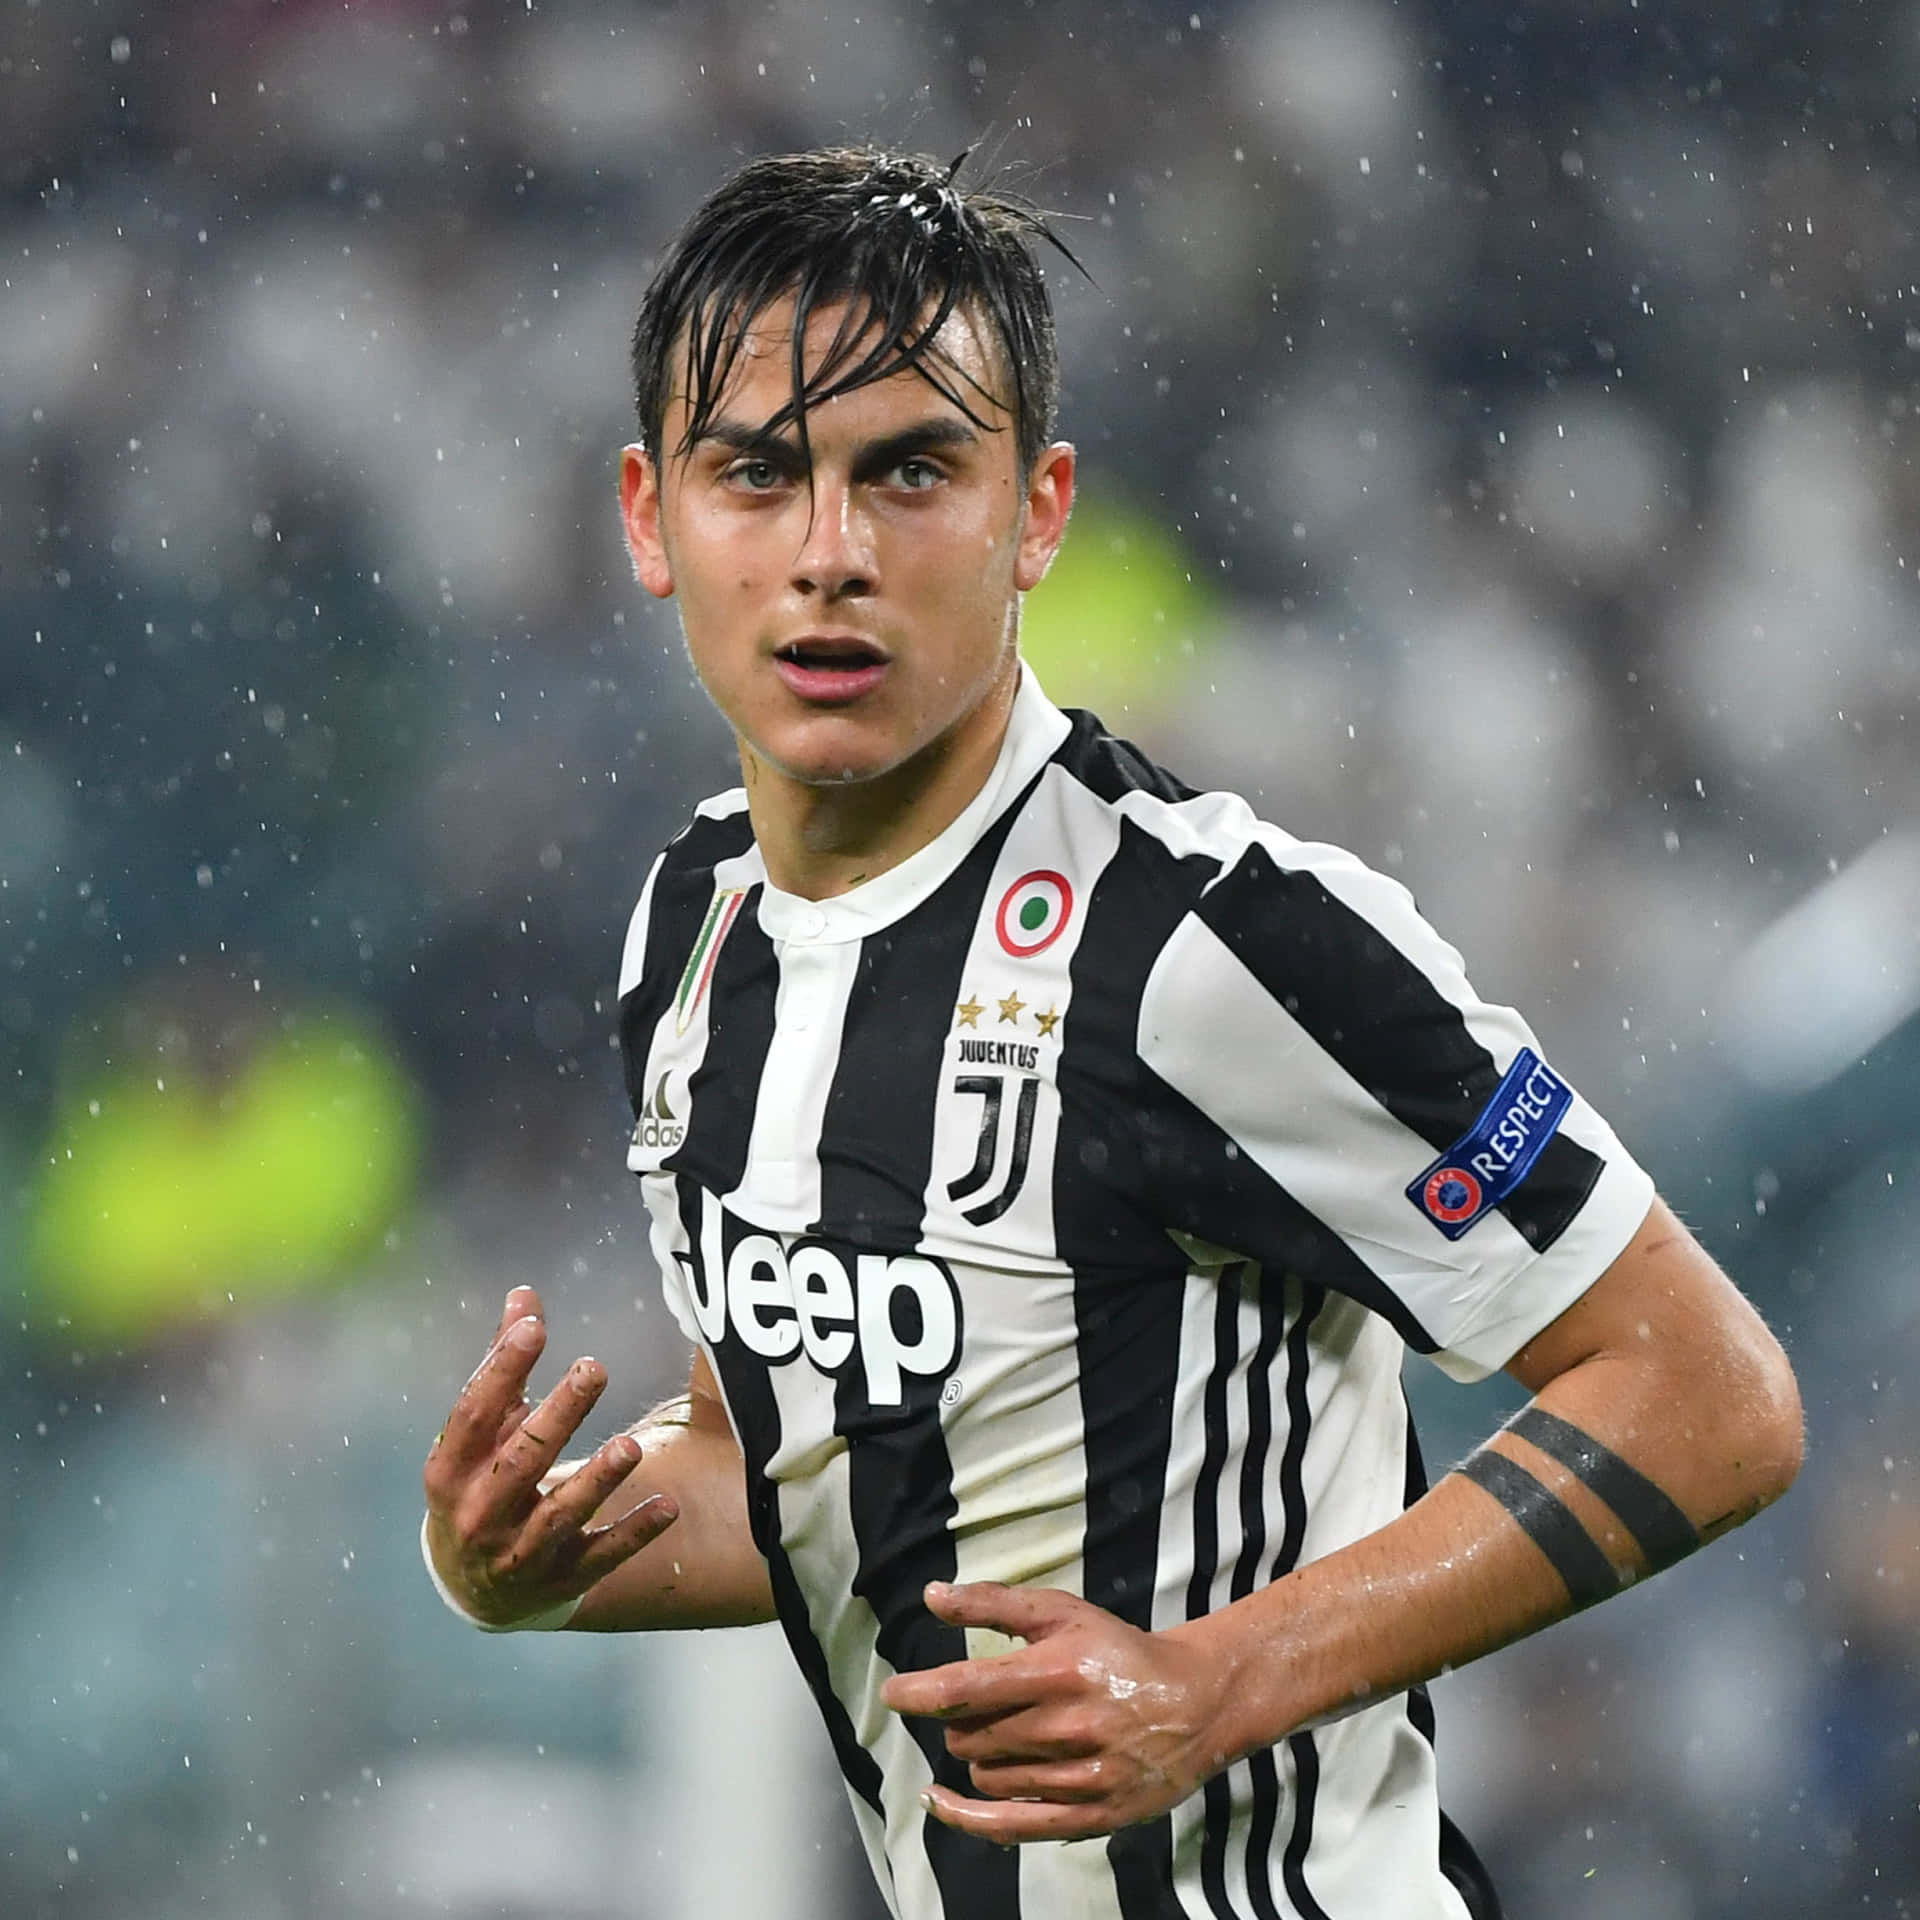 Dynamic Paulo Dybala During A Heated Match Wallpaper